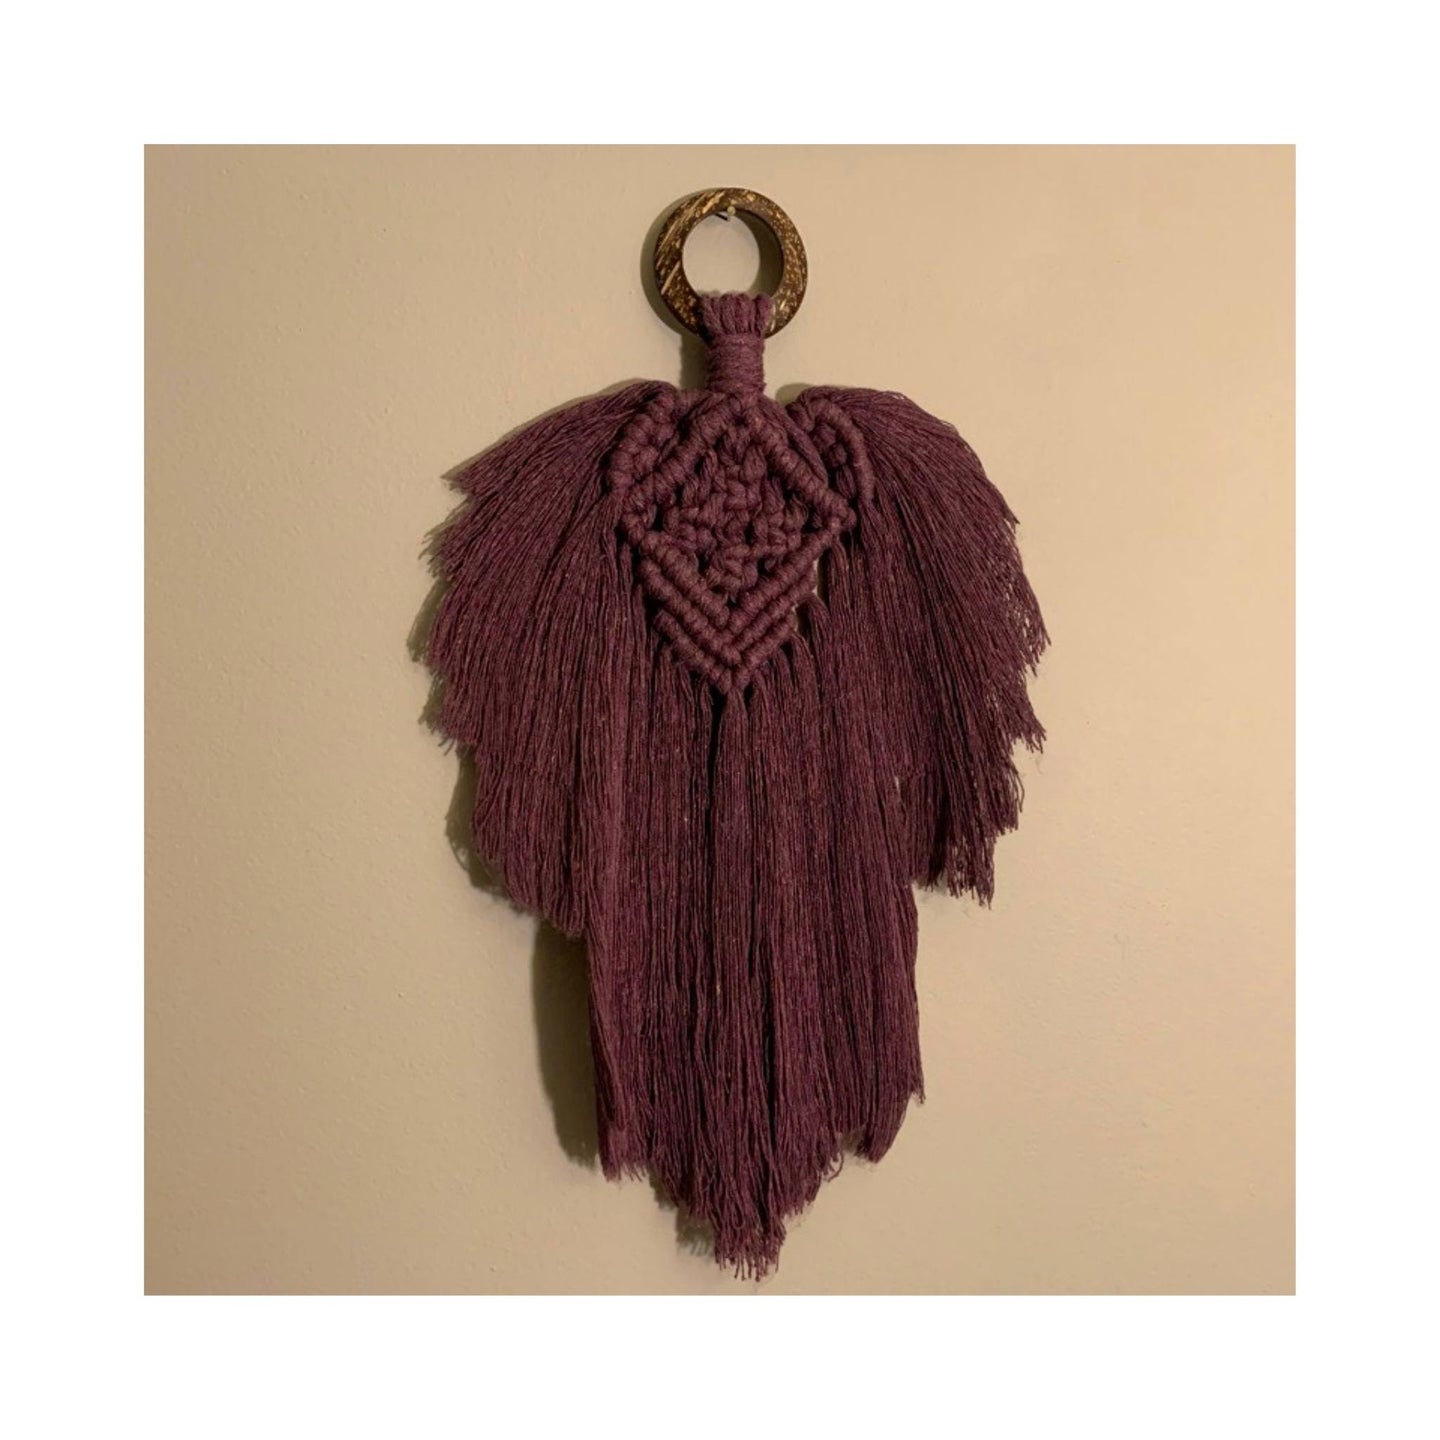 Raven is a beautiful macrame feather that’s the perfect accent for your wall. The ring has a gorgeous unique look as it’s made from coconut shell. You can mix and match any of the feathers or request them to be made in a variety of colors.